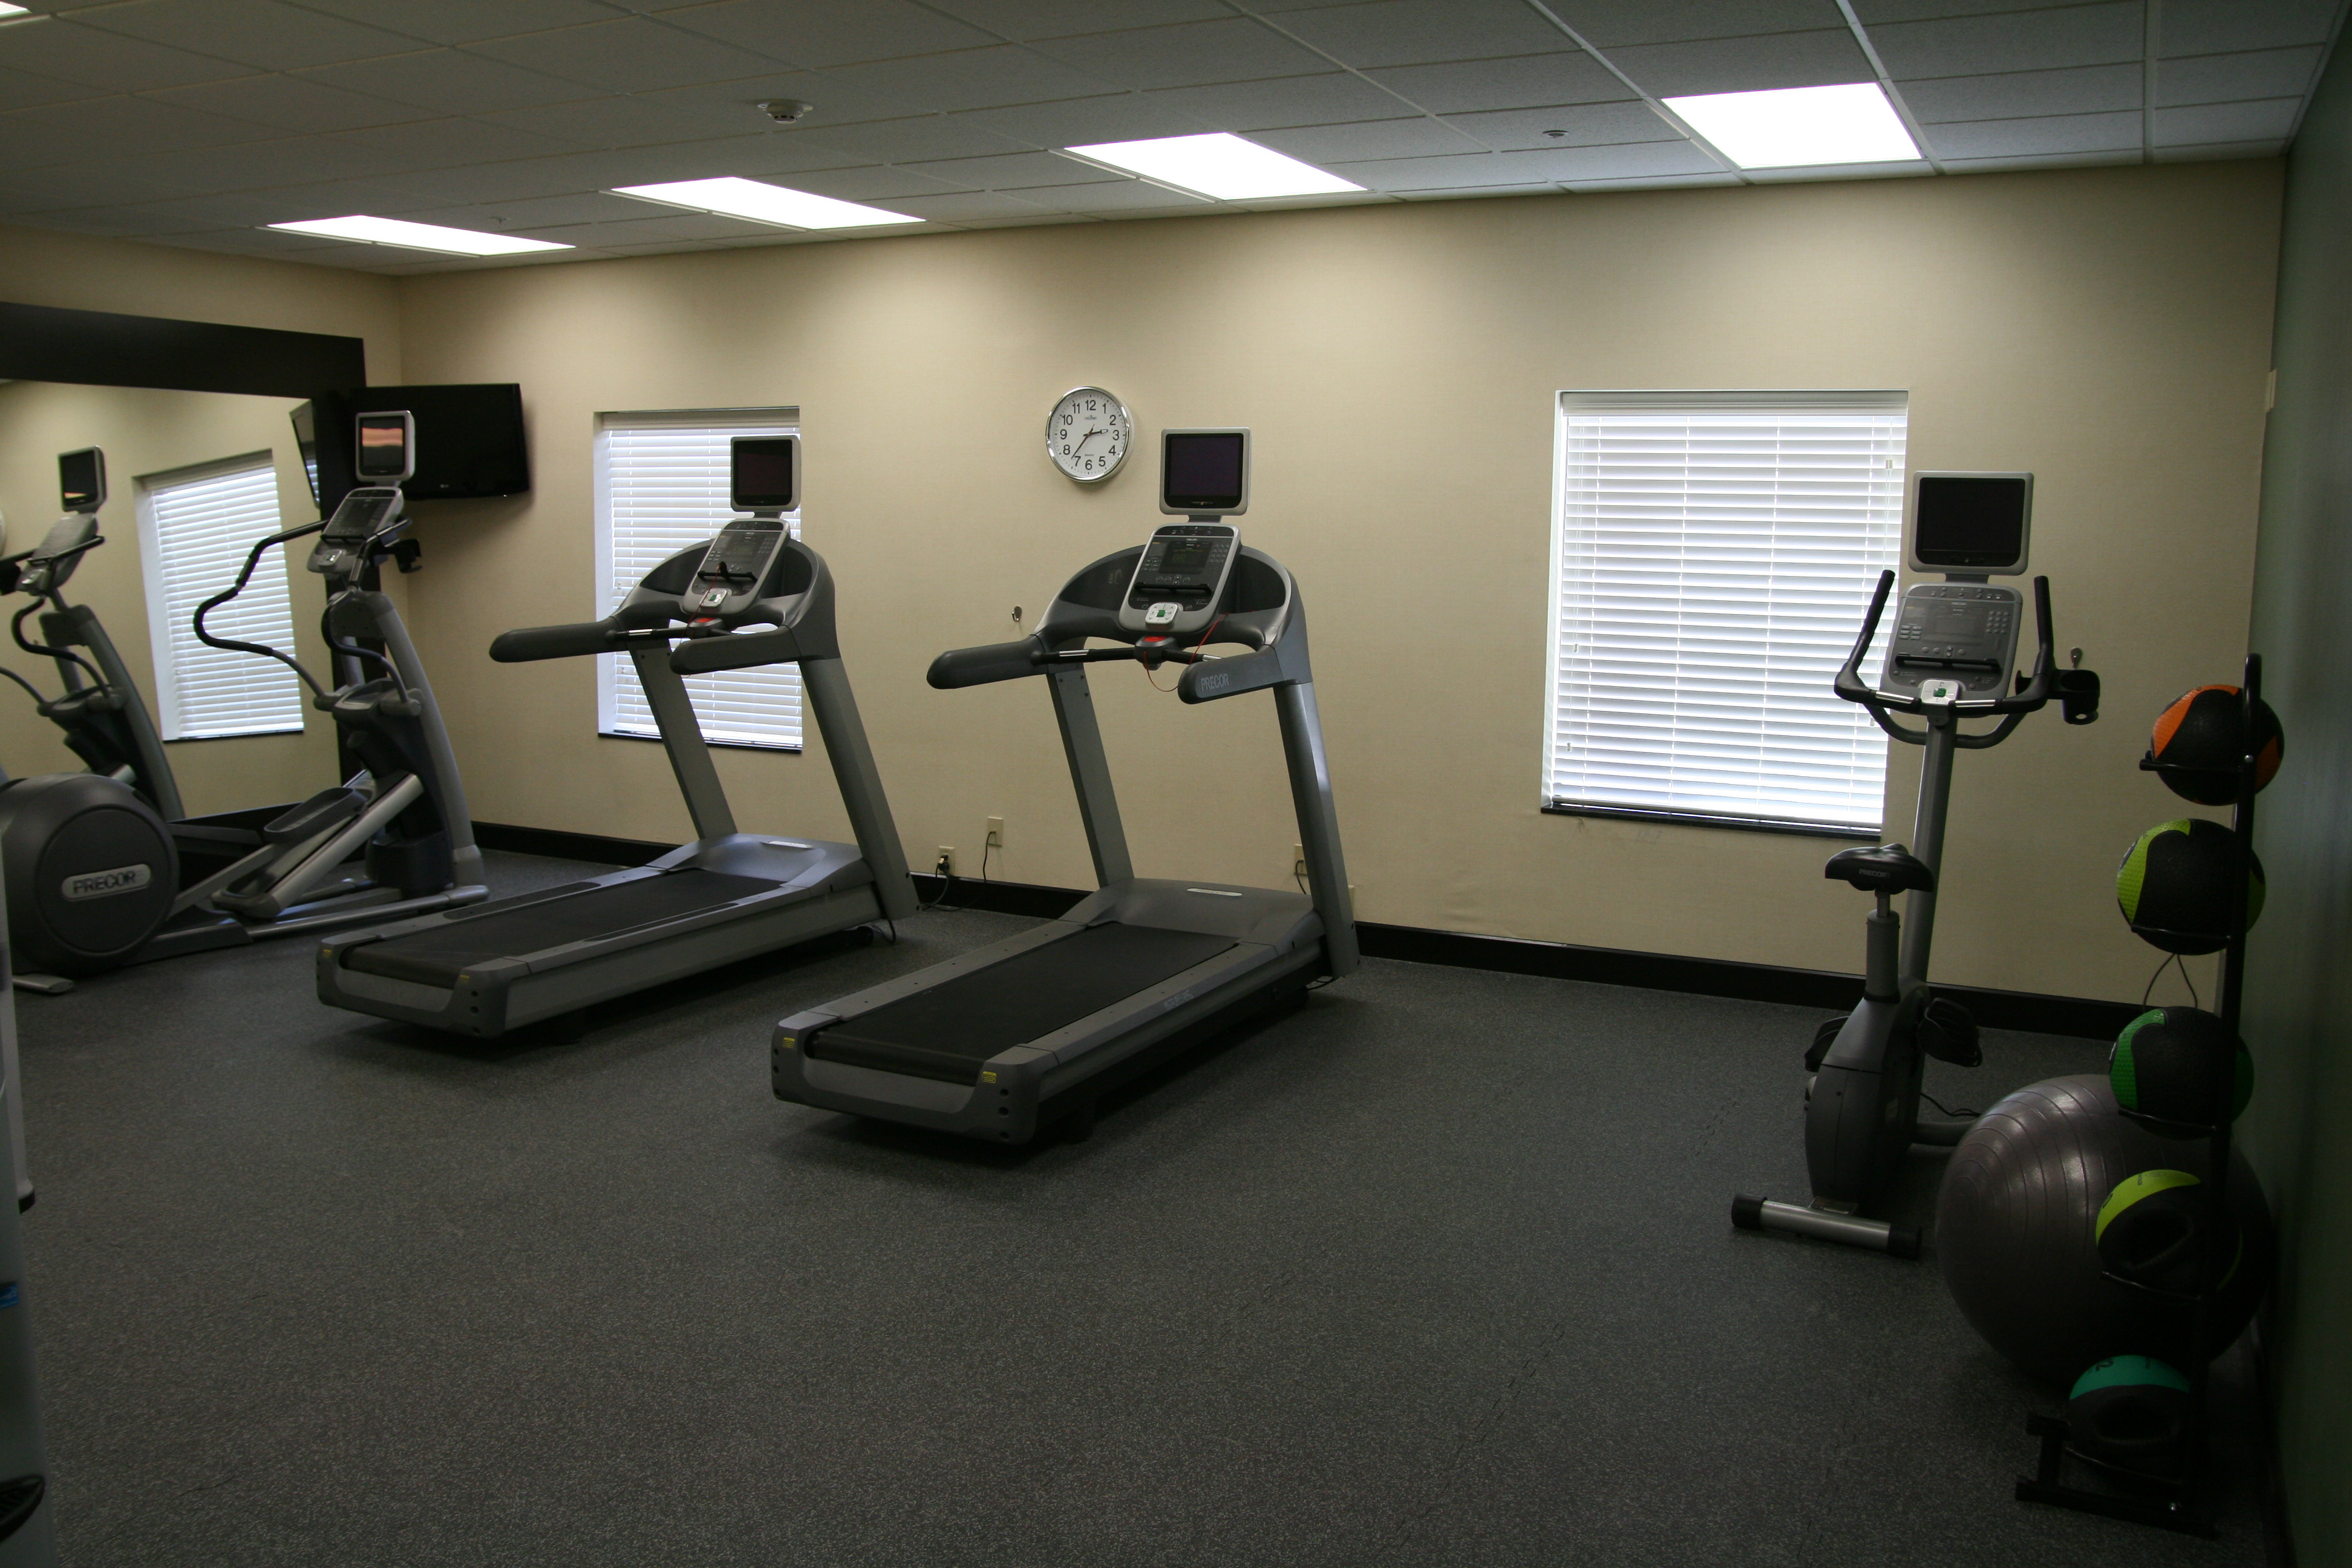 Fitness Room With Large Mirror, TV, Cardio Equipment Facing Windows, Wall Clock, Exercise and Weight Balls